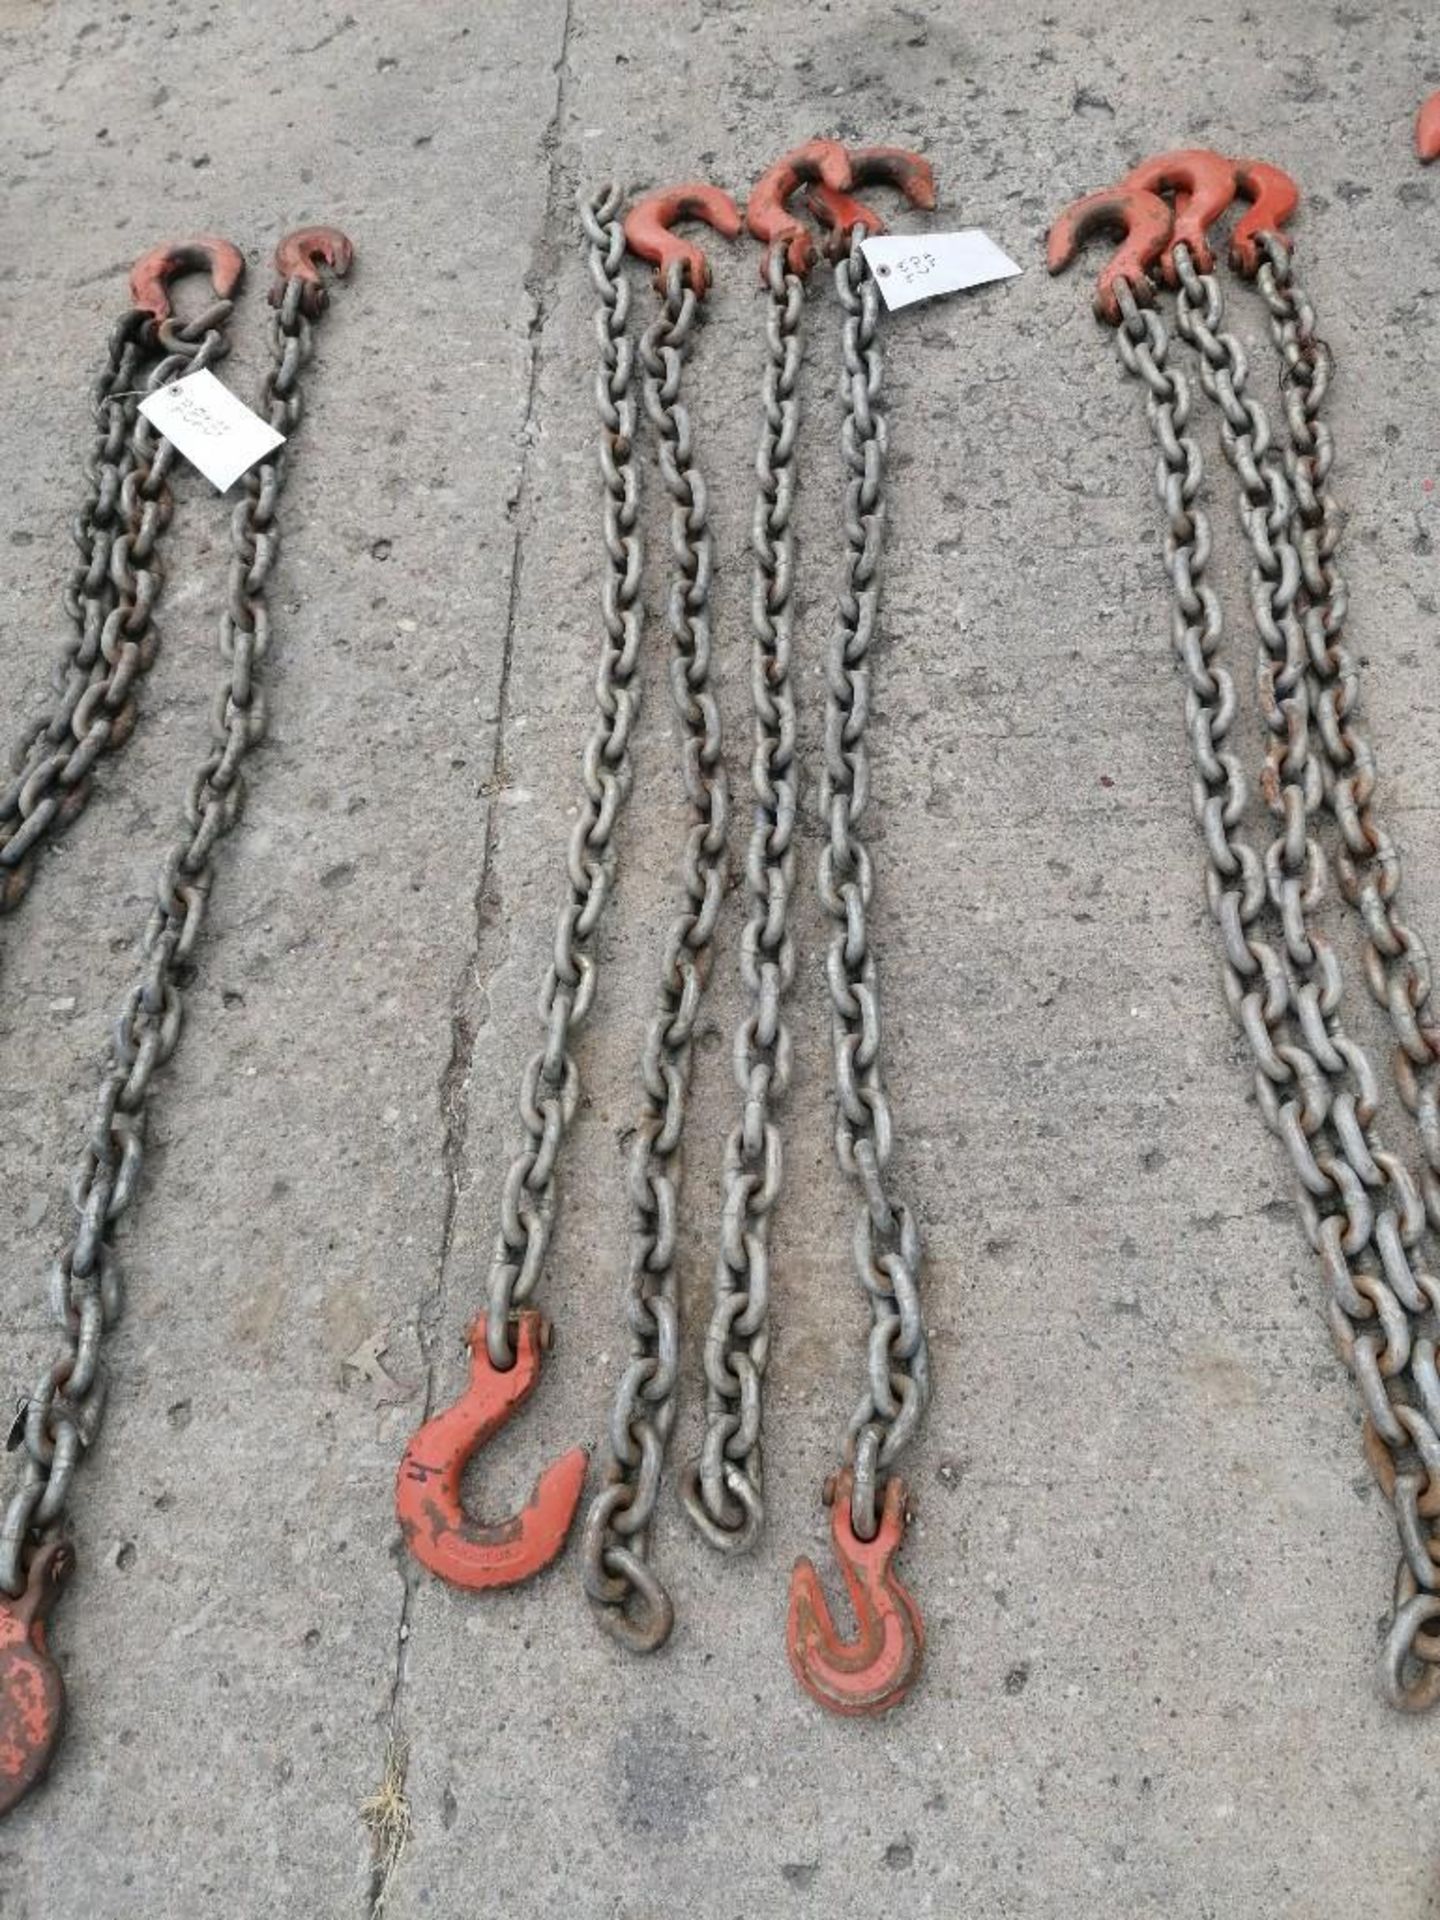 (4) 1/2" USA 4' Chain with hook. Located at 301 E Henry Street, Mt. Pleasant, IA 52641.